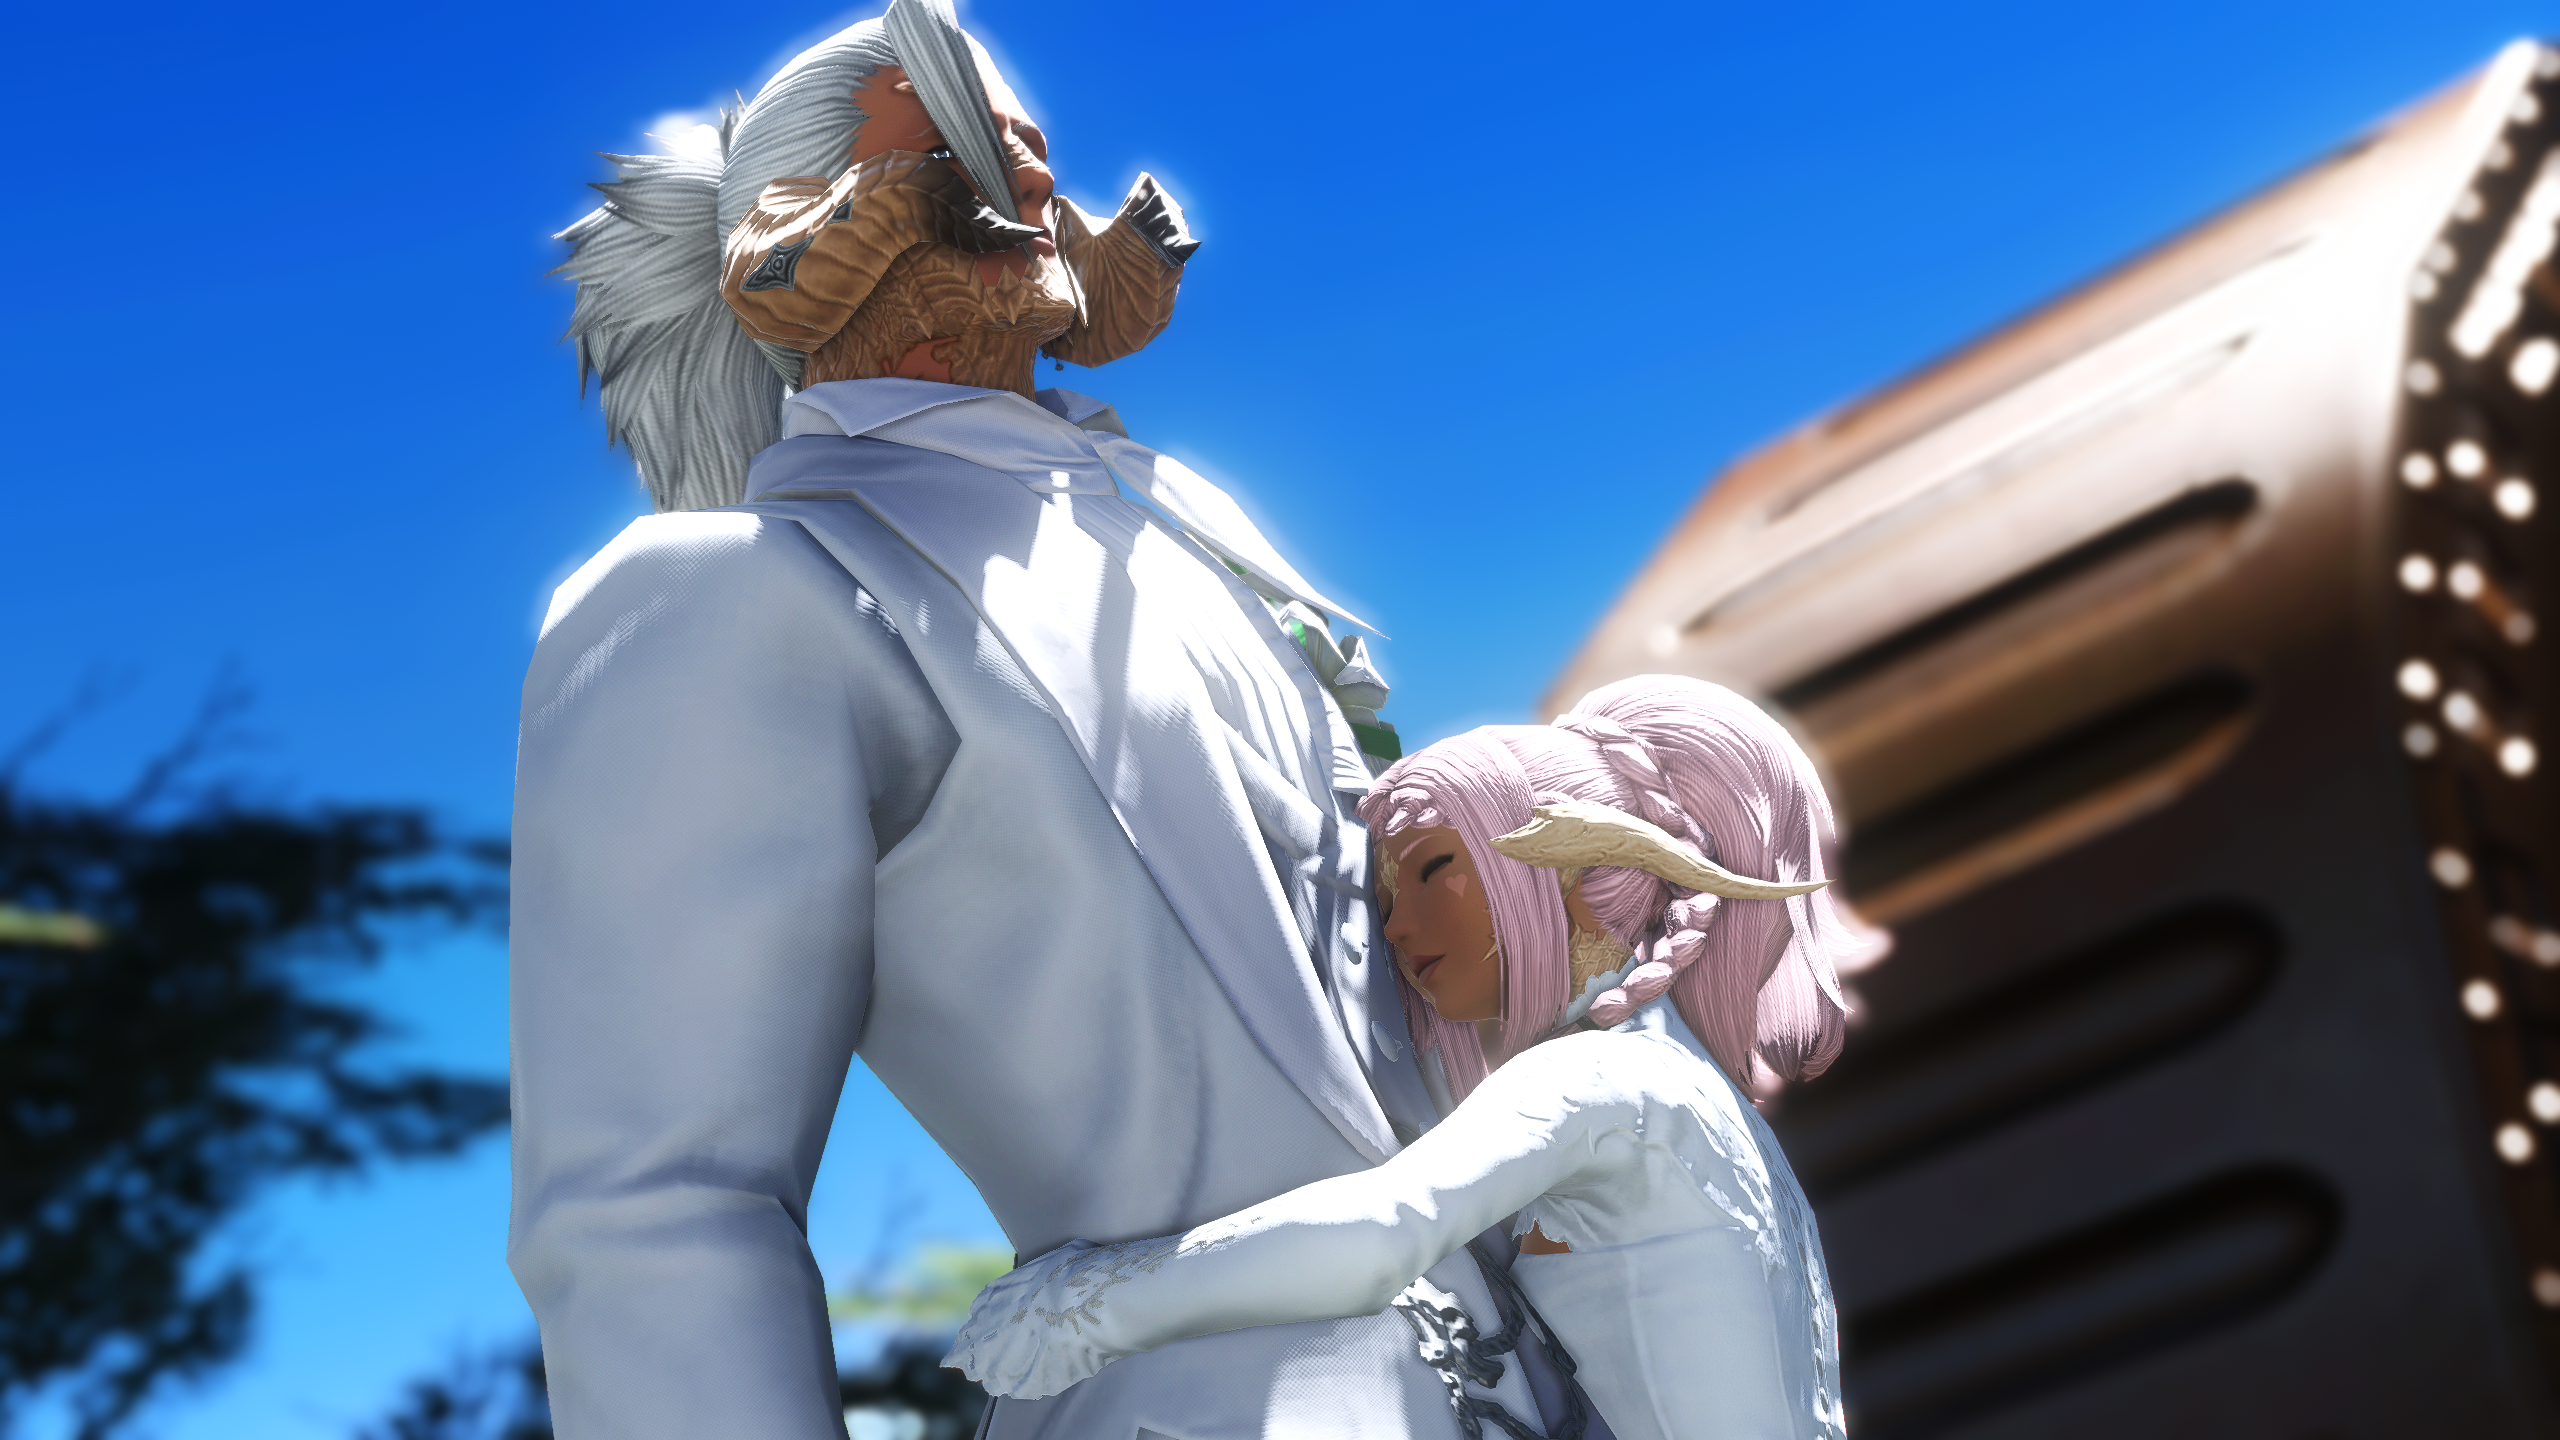 General 2560x1440 Final Fantasy XIV: A Realm Reborn reshade Au Ra weddings peace CGI video game characters video game men video game girls closed eyes video games wedding attire